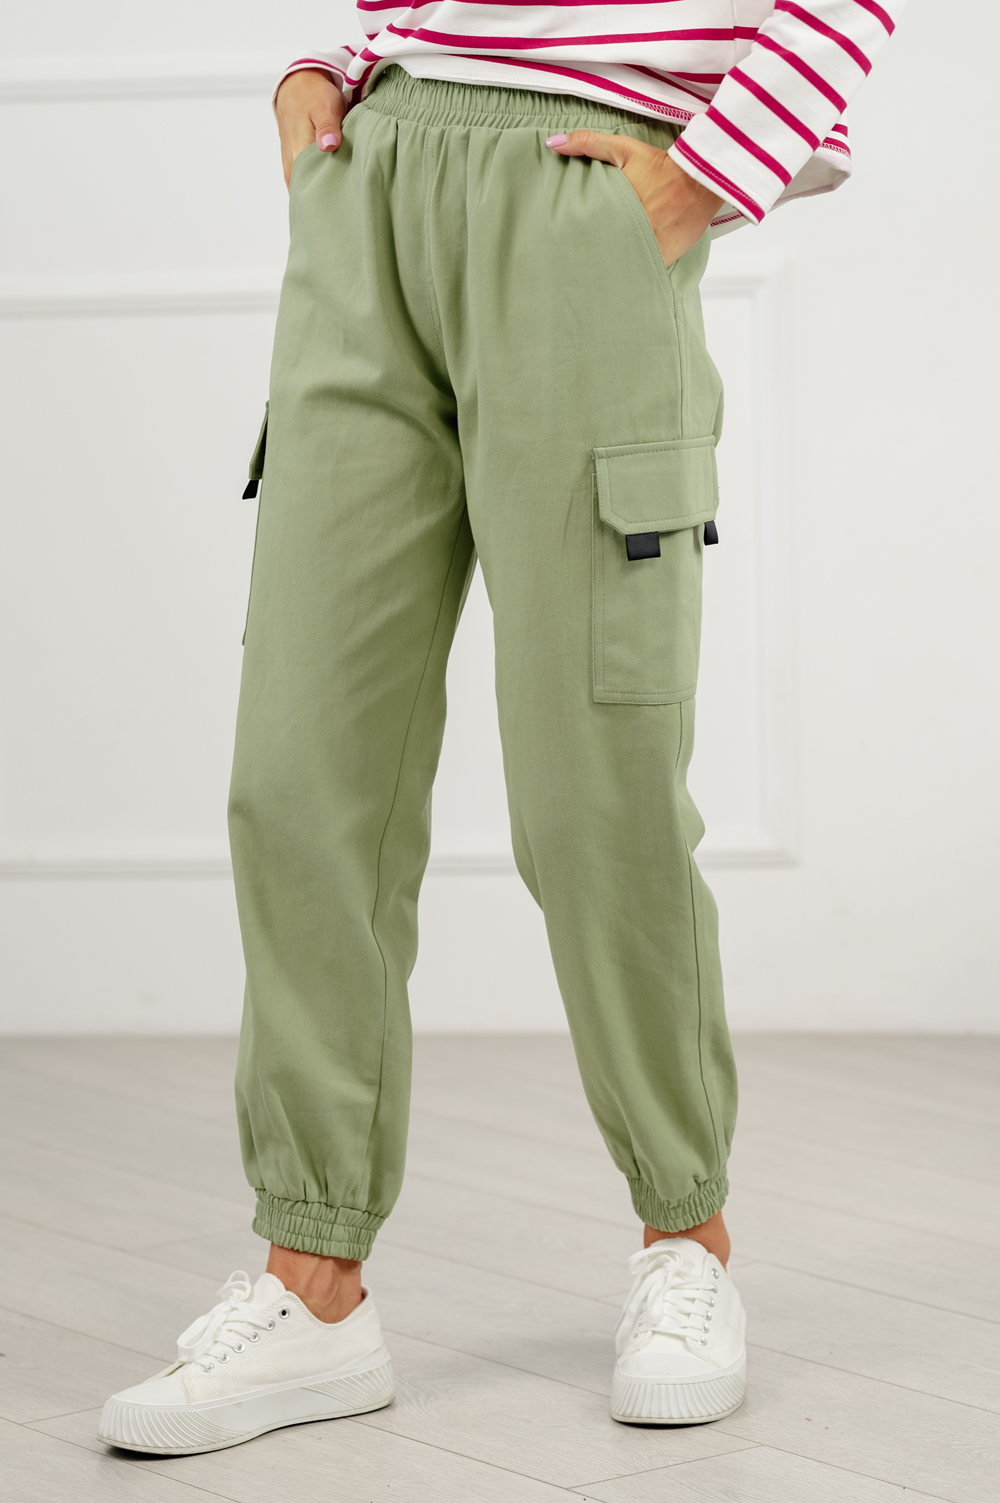 Casual cargo pants in olive color.